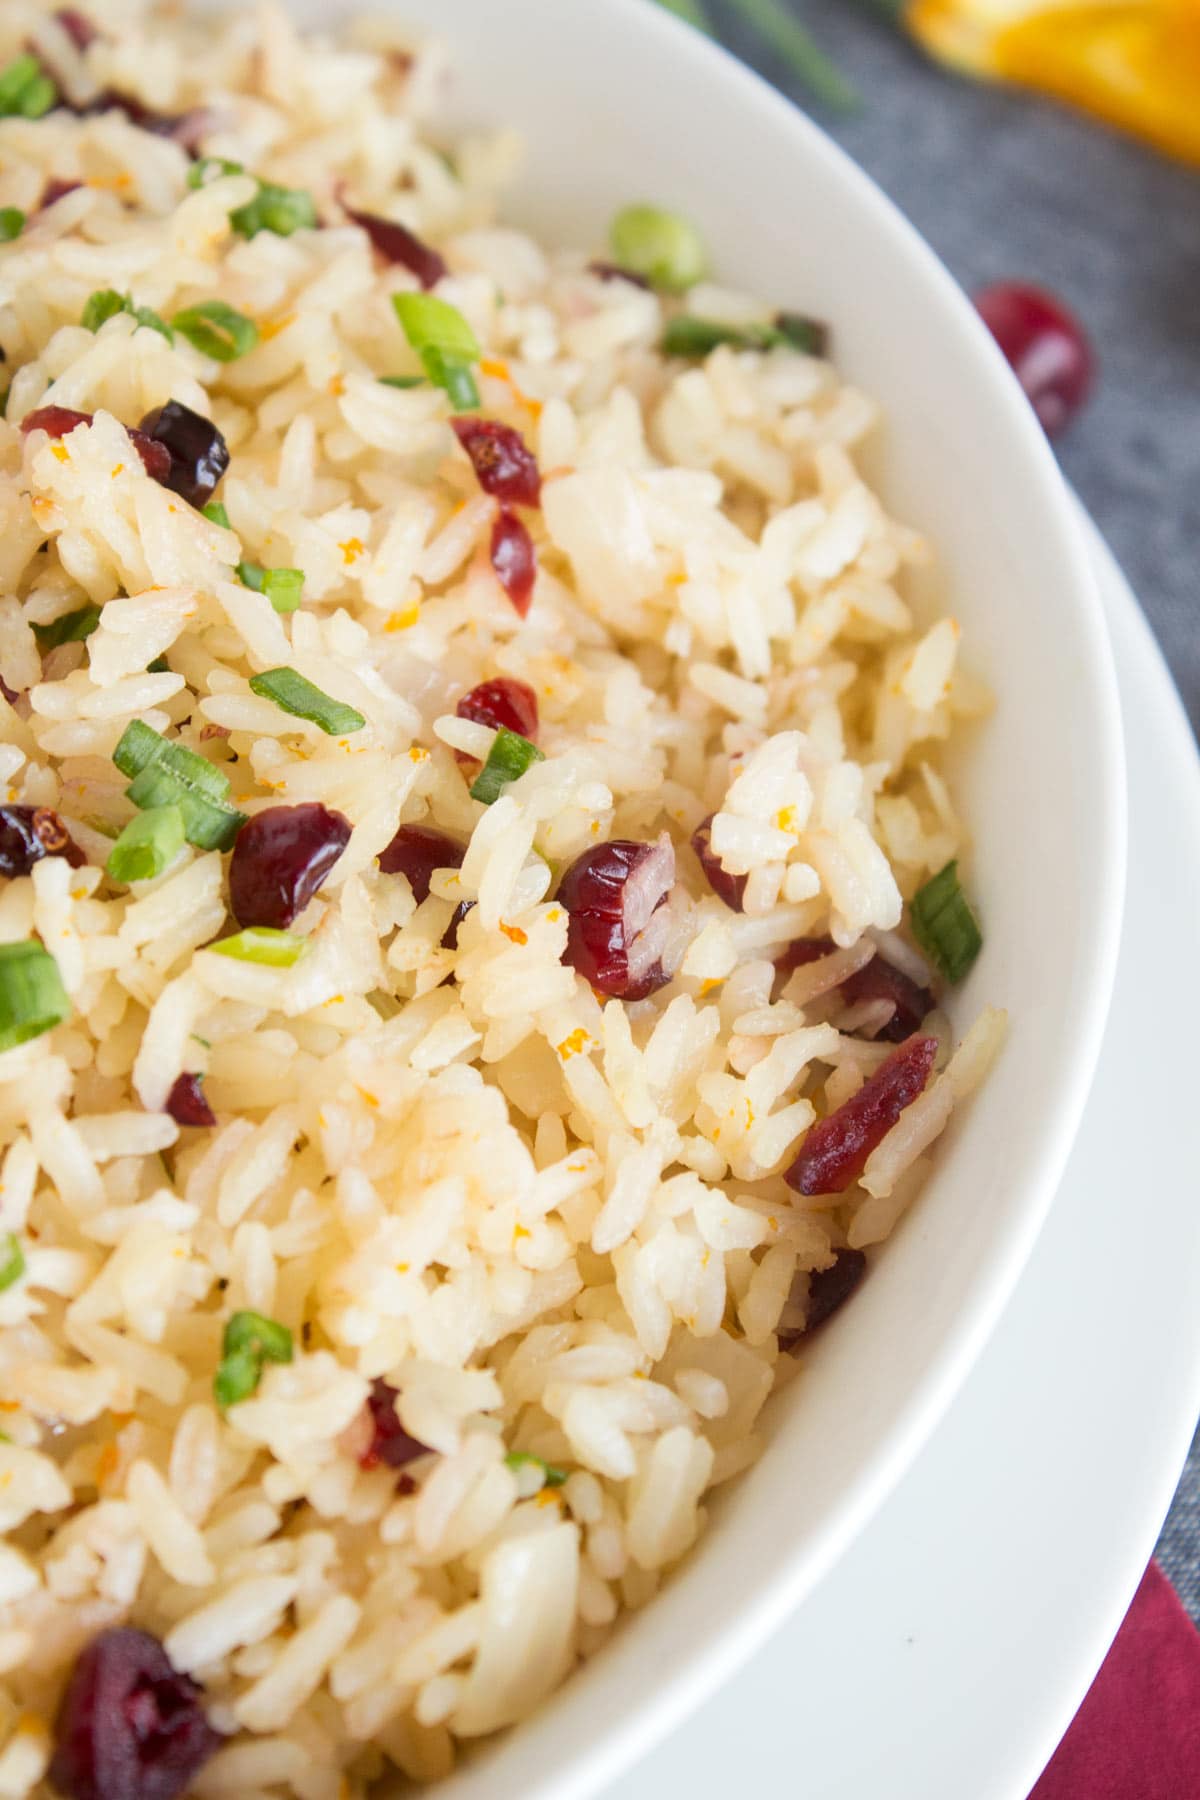 Super close view of orange rice with cranberries and green onions mixed in.